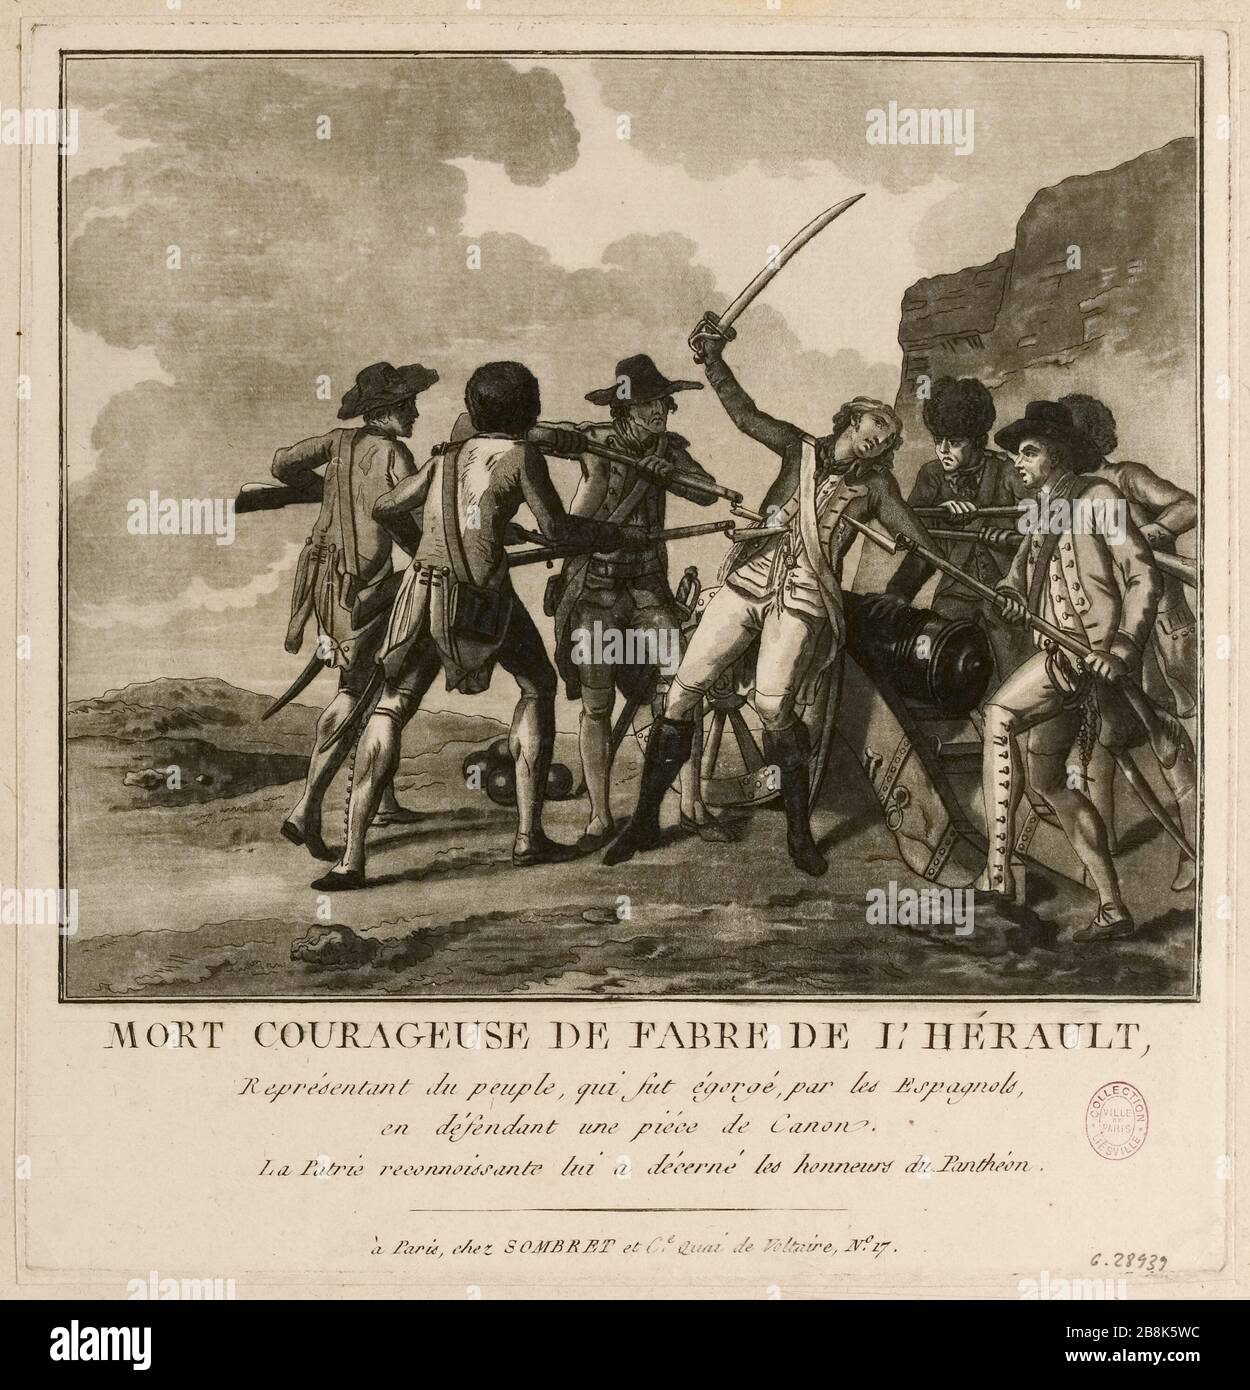 courageous death Fabre Hérault, representative of the people, who was murdered by the Spaniards, in defending a cannon (...) [French Revolution]. (registered title (letter)) Stock Photo